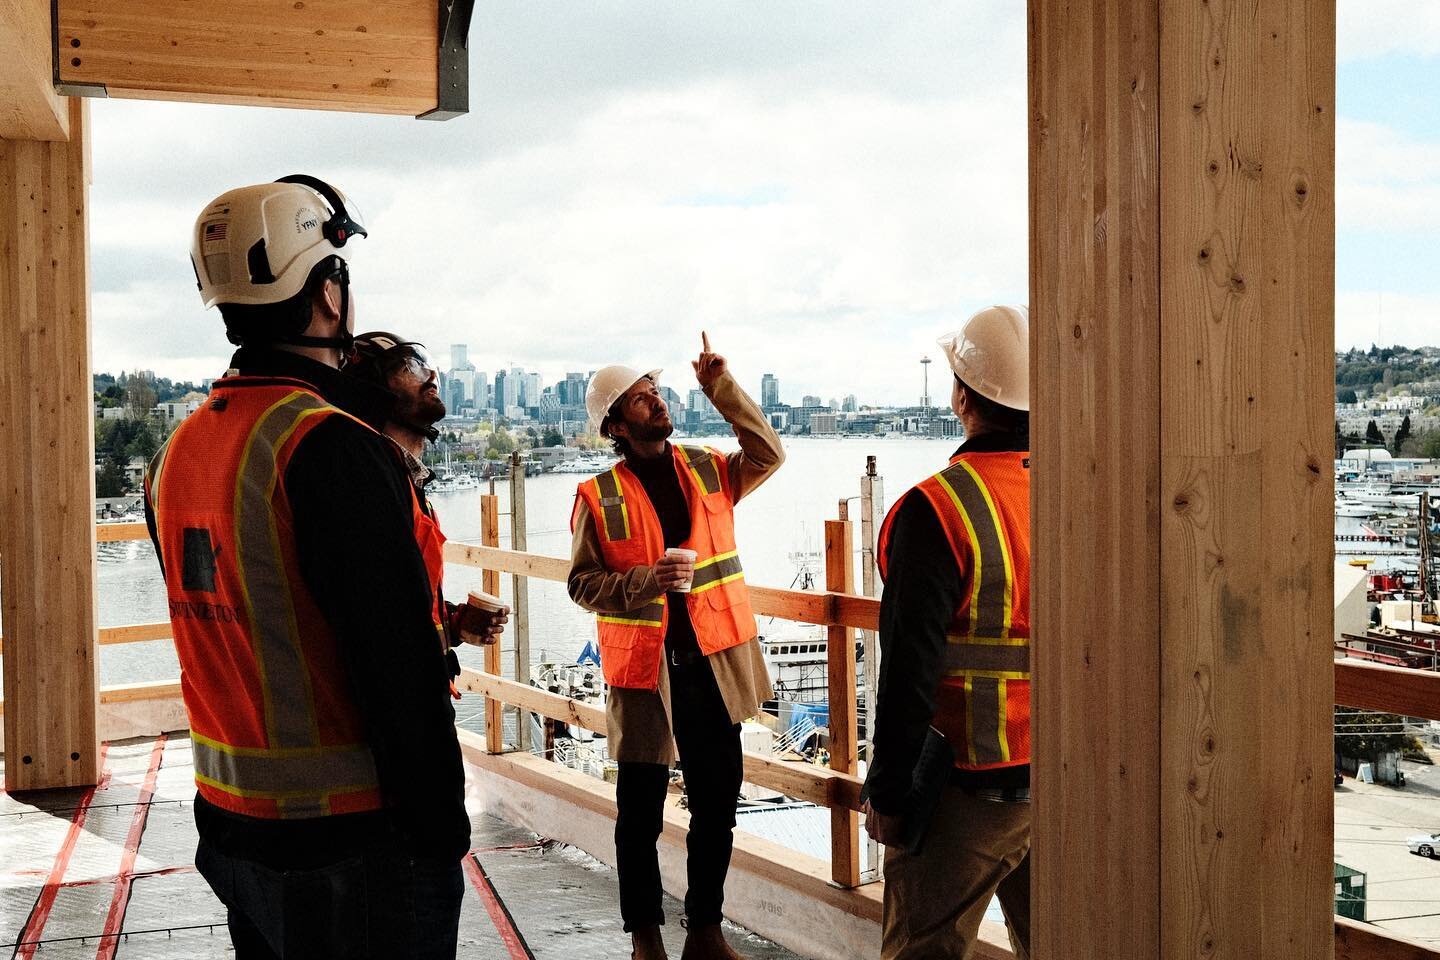 @hans.up on site with the @timberlabinc and @swinerton1888 teams, dreaming about #masstimber connections and #seattlesunshine 

@hesscallahangreygroup #seattle #design #seattledevelopment #construction #coreandshell #lakeunion